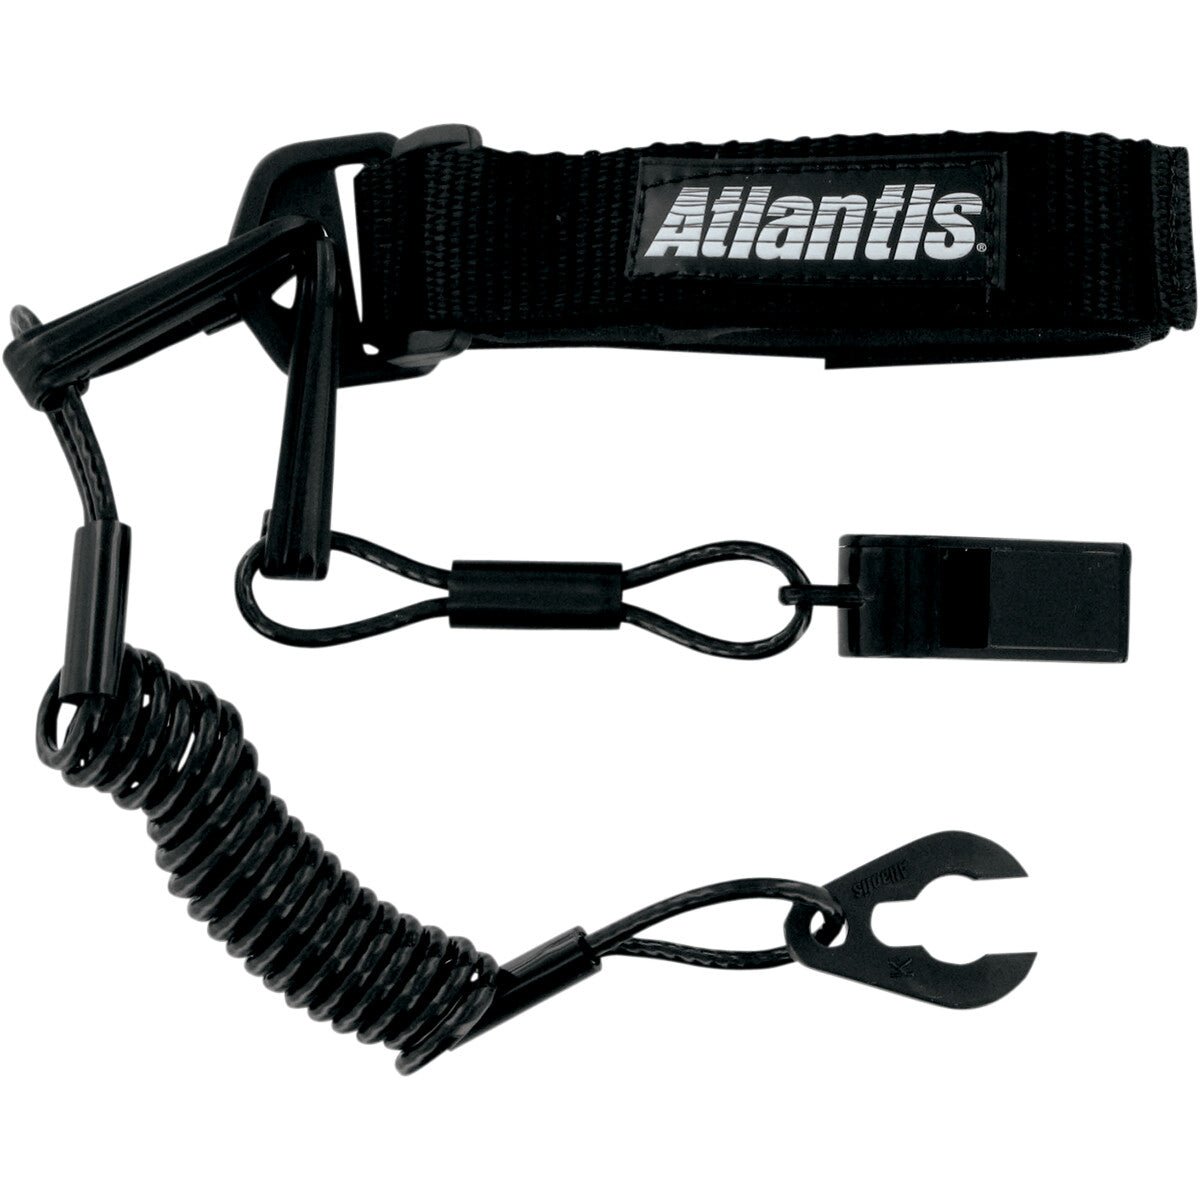 Atlantis Pro Float Race Lanyard with removable whistle and armband (Black or Red) - Performance Jet Ski (PJS) UK